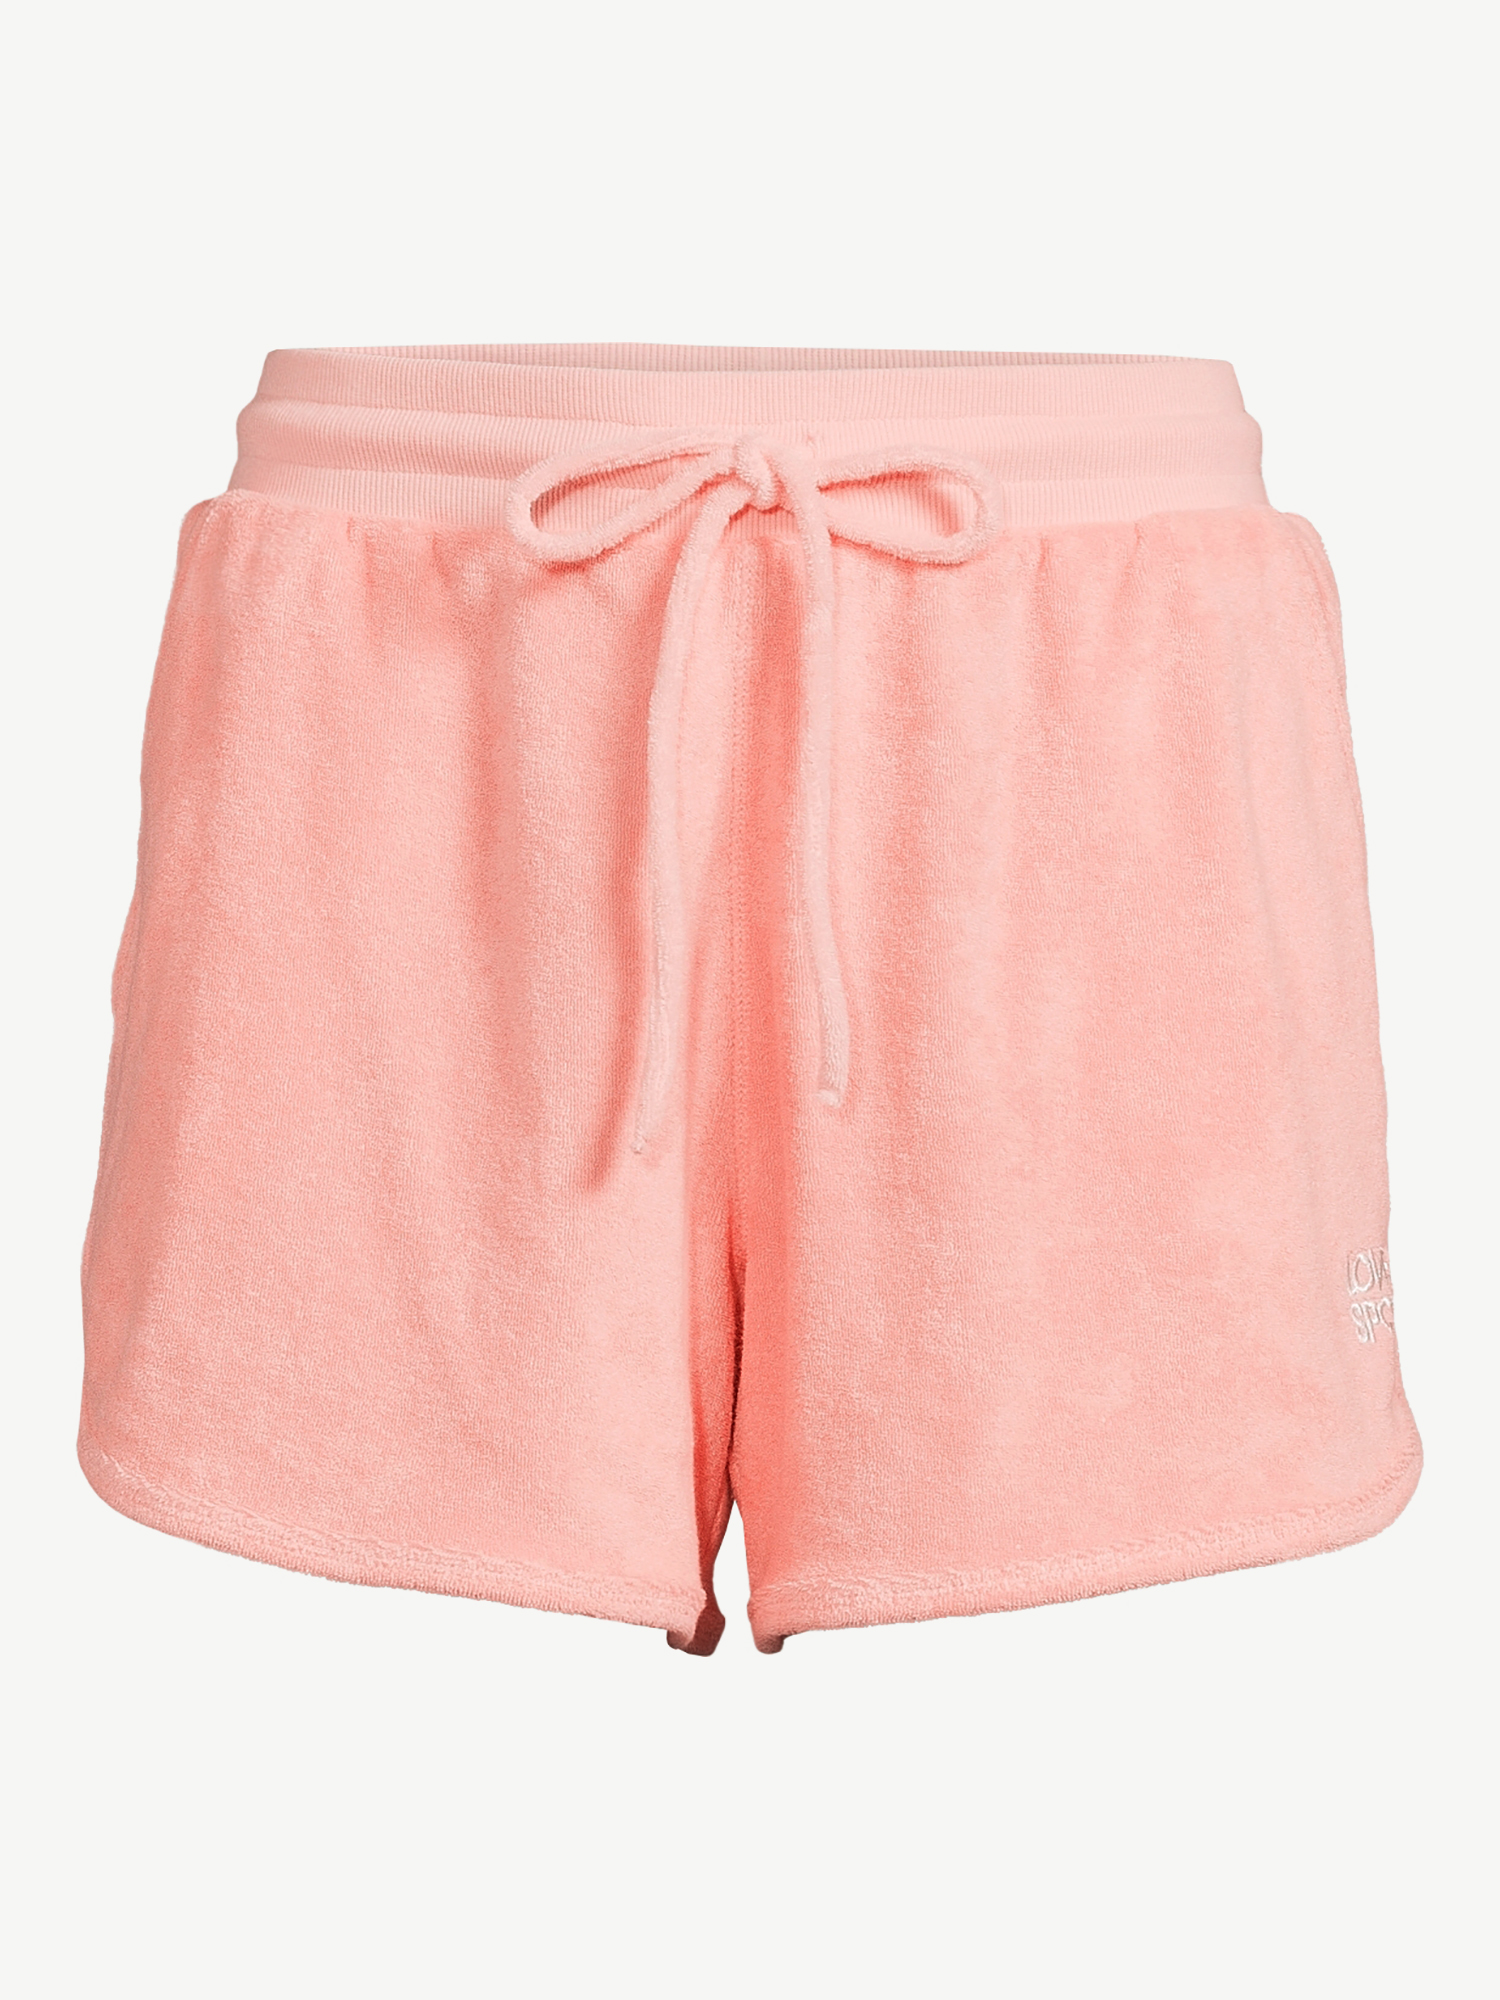 Love & Sports Women's Baby Terry Cloth Lounge Shorts - image 5 of 6